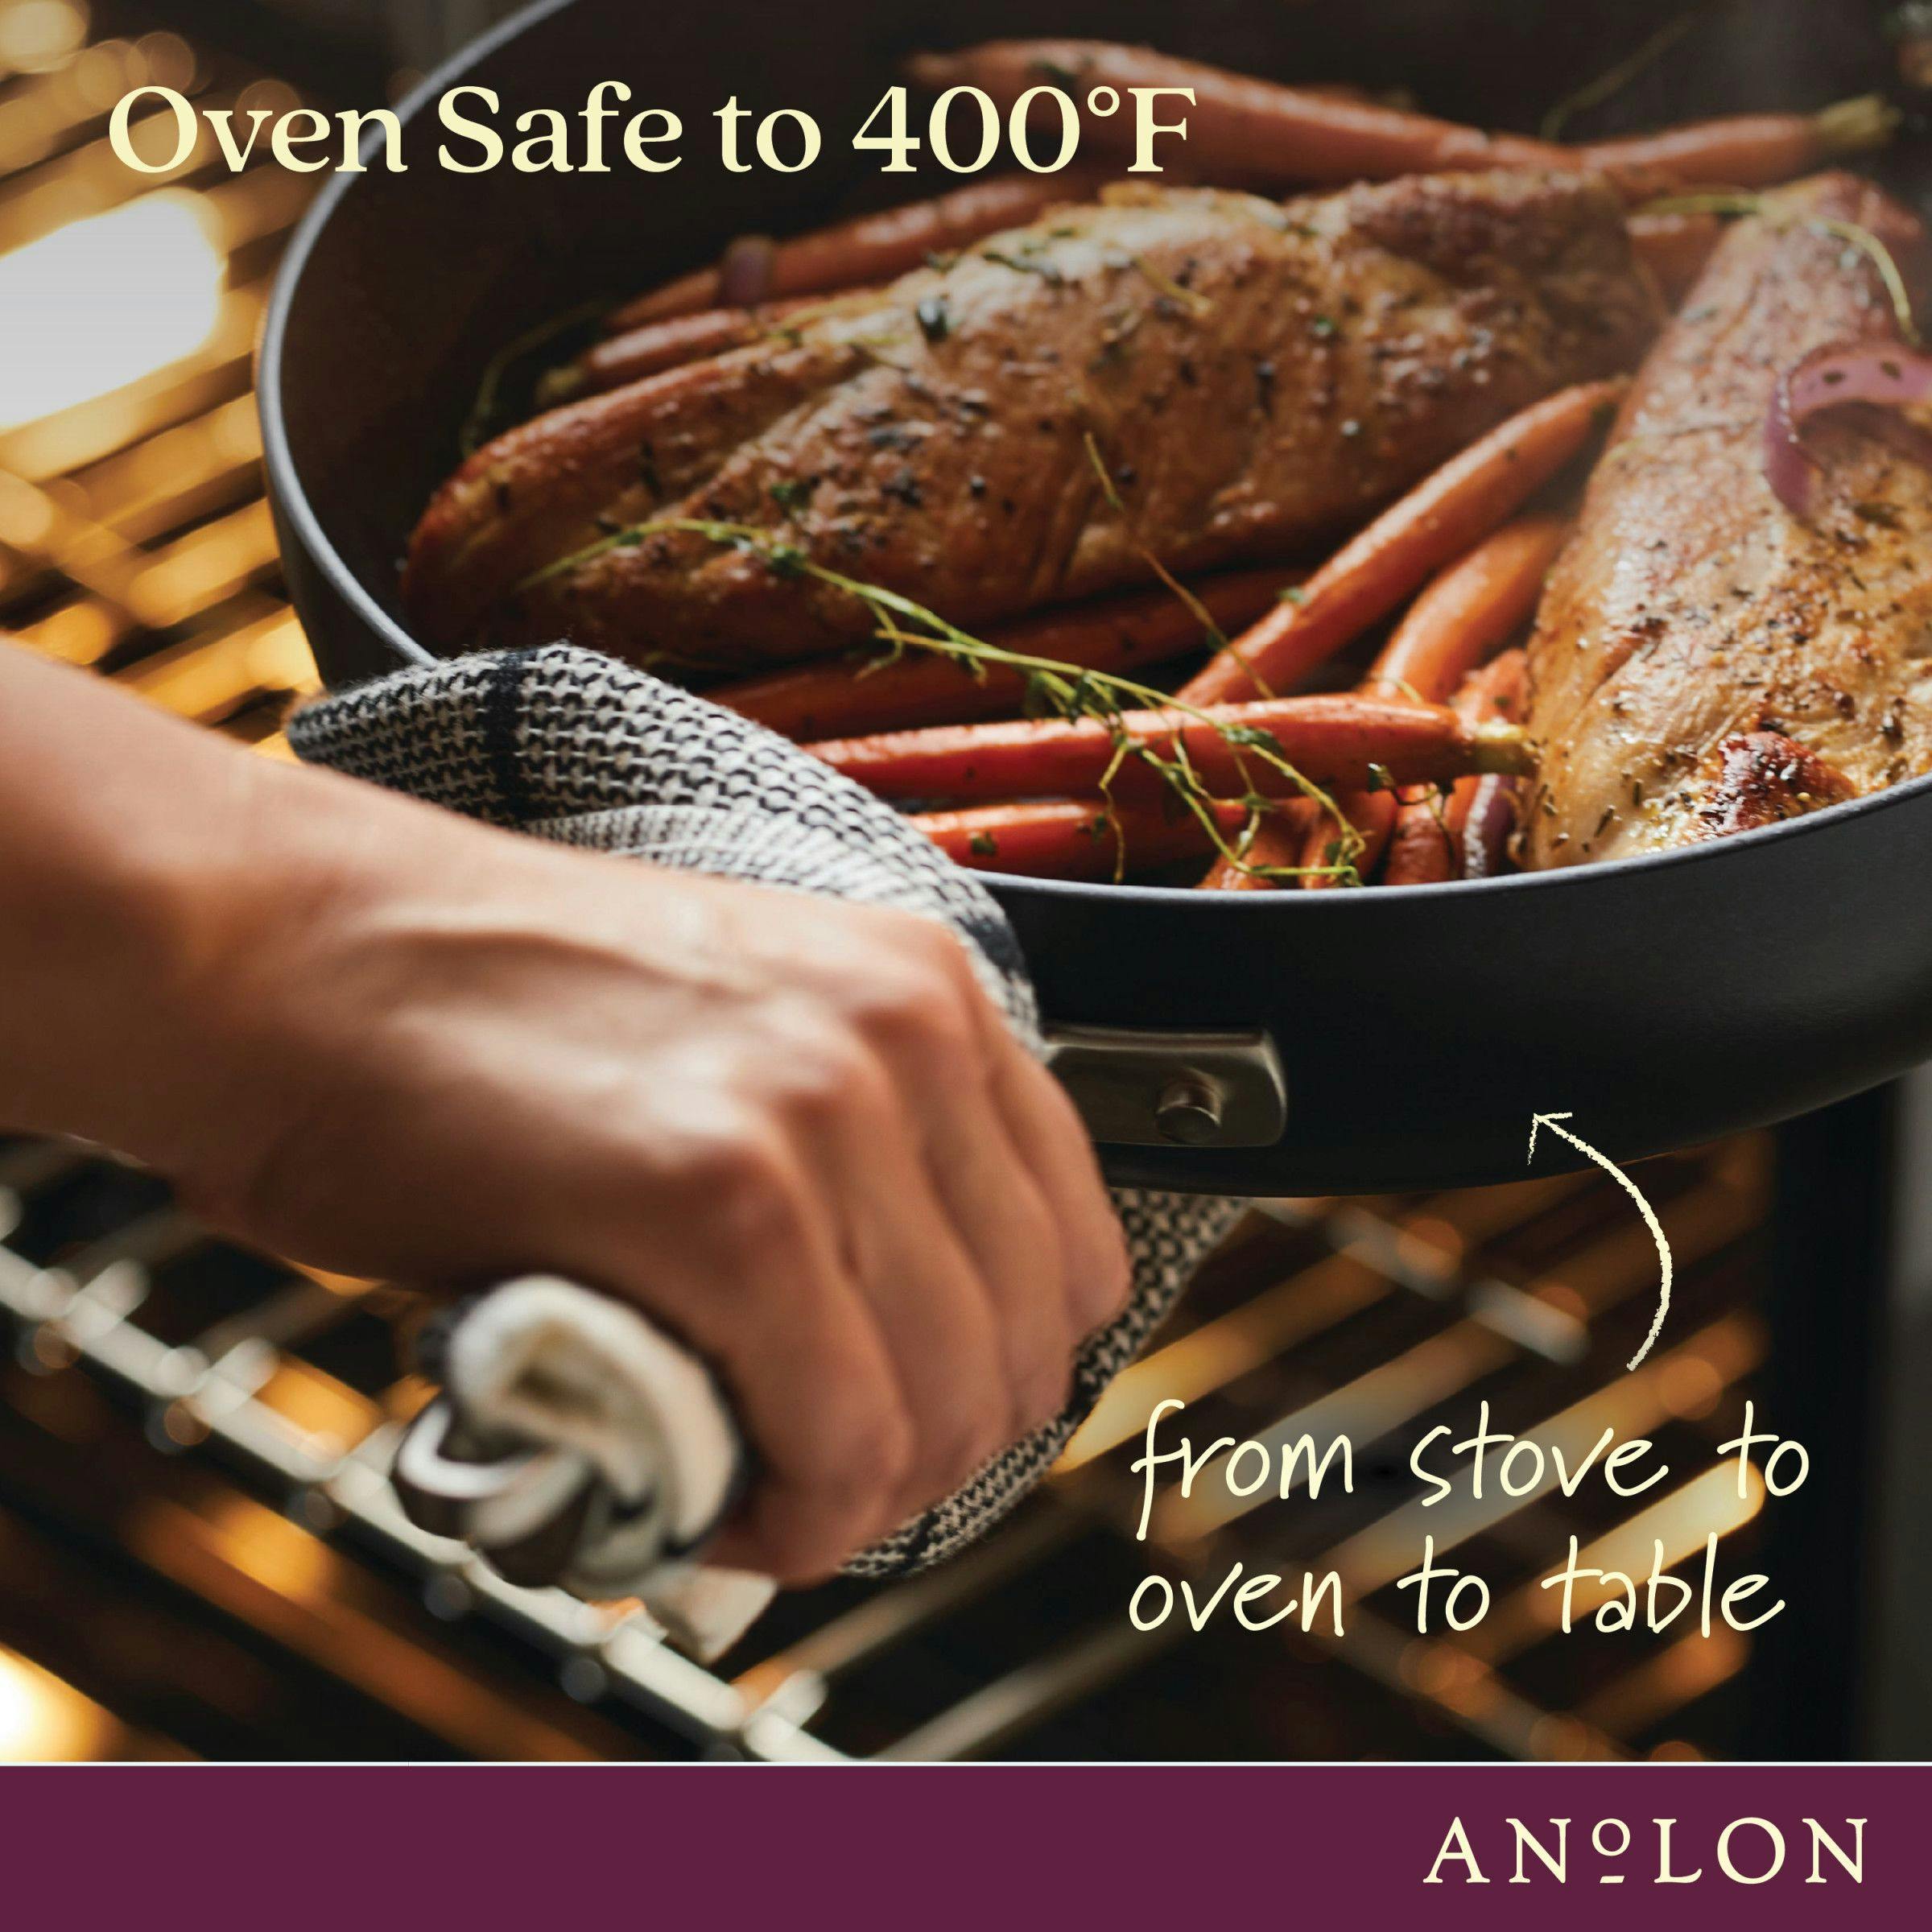 Anolon Advanced Home Hard-Anodized Nonstick Frying Pan with Helper Handle, 14.5-Inch, Onyx